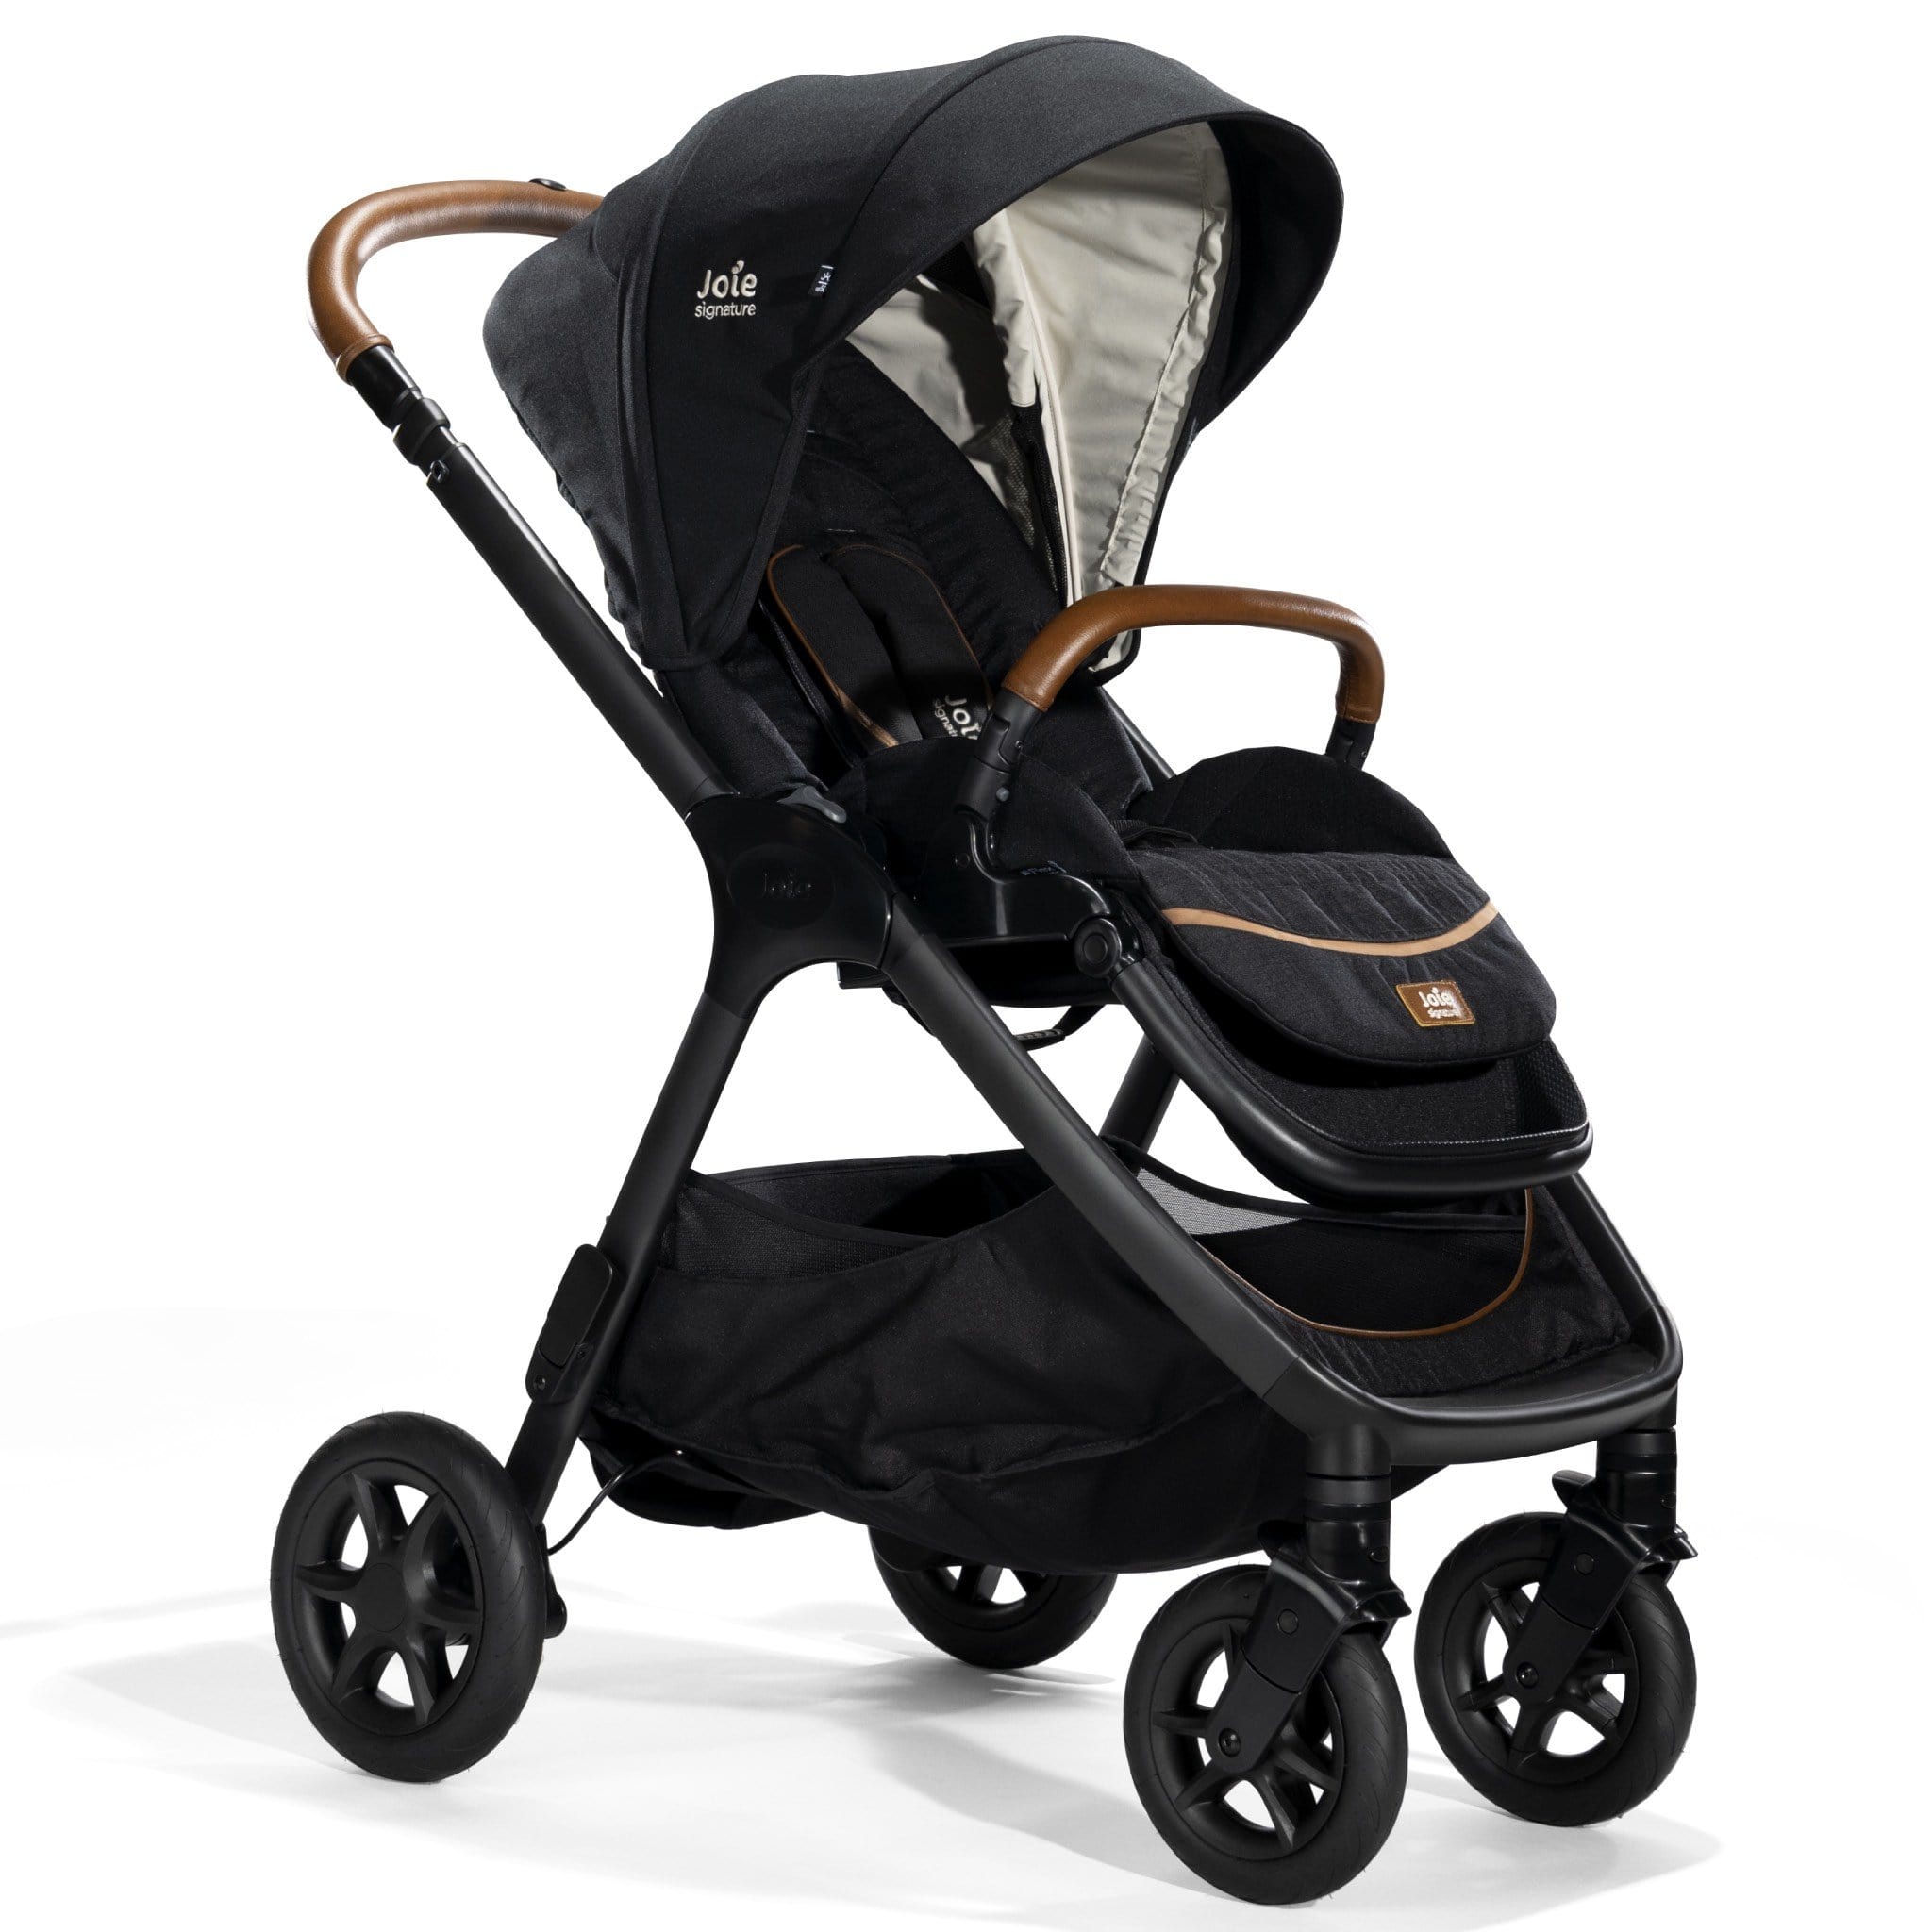 Joie baby prams Joie Finiti 4in1 Signature Edition Pram Eclipse S1606AAECL000